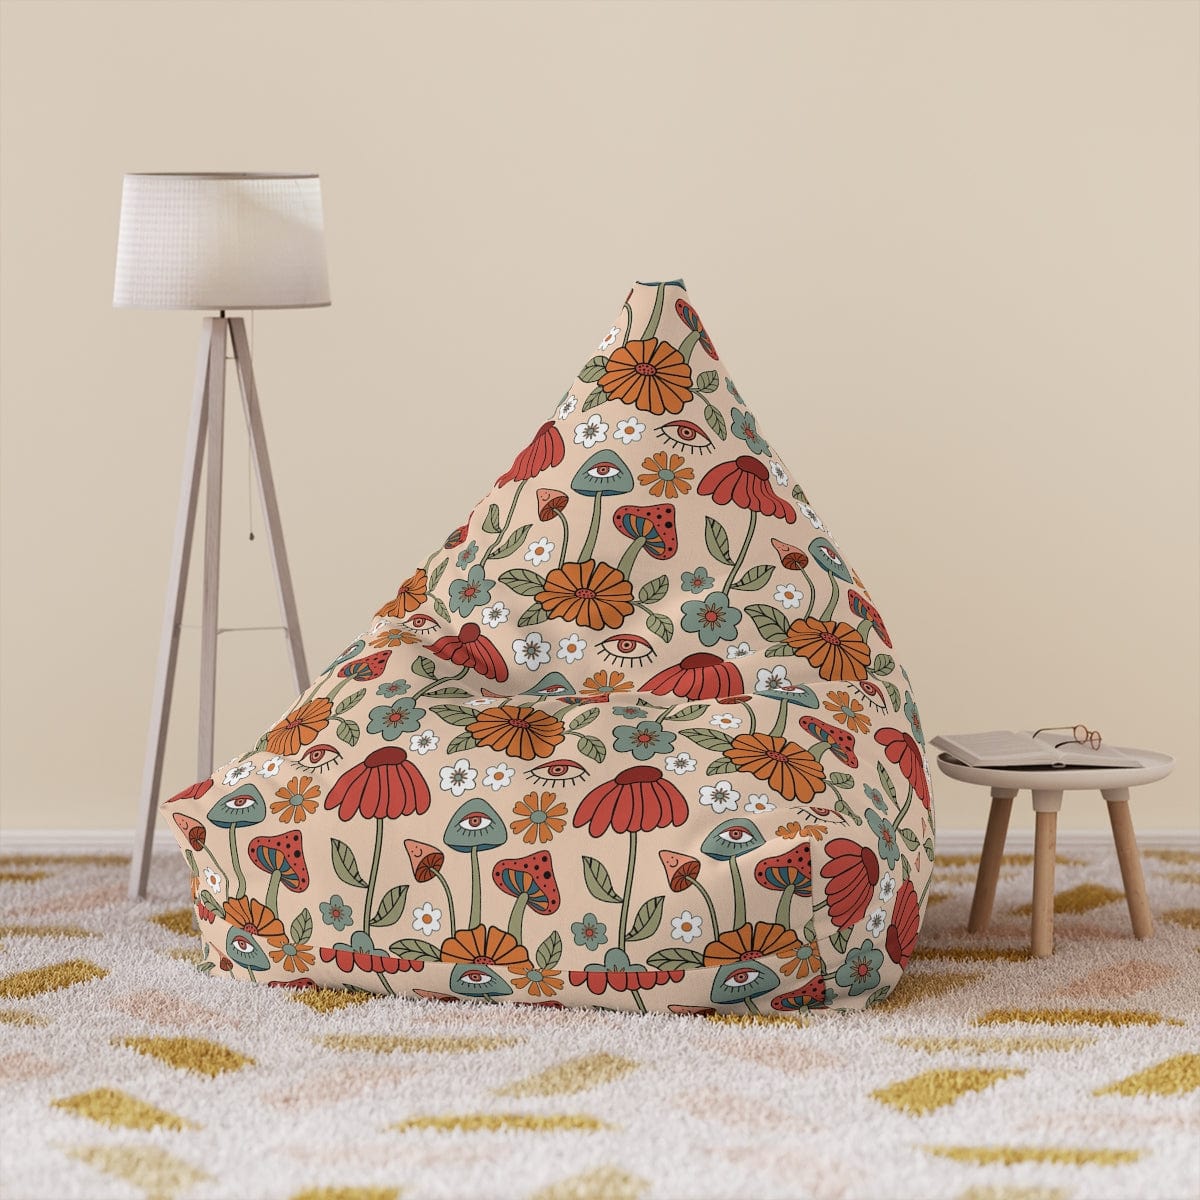 Kate McEnroe New York Cottagecore Aesthetic Retro Hippie Mushroom Bean Bag Chair Cover Bean Bag Chair Covers 38" × 42" × 29" / Without insert 19879020965874837788